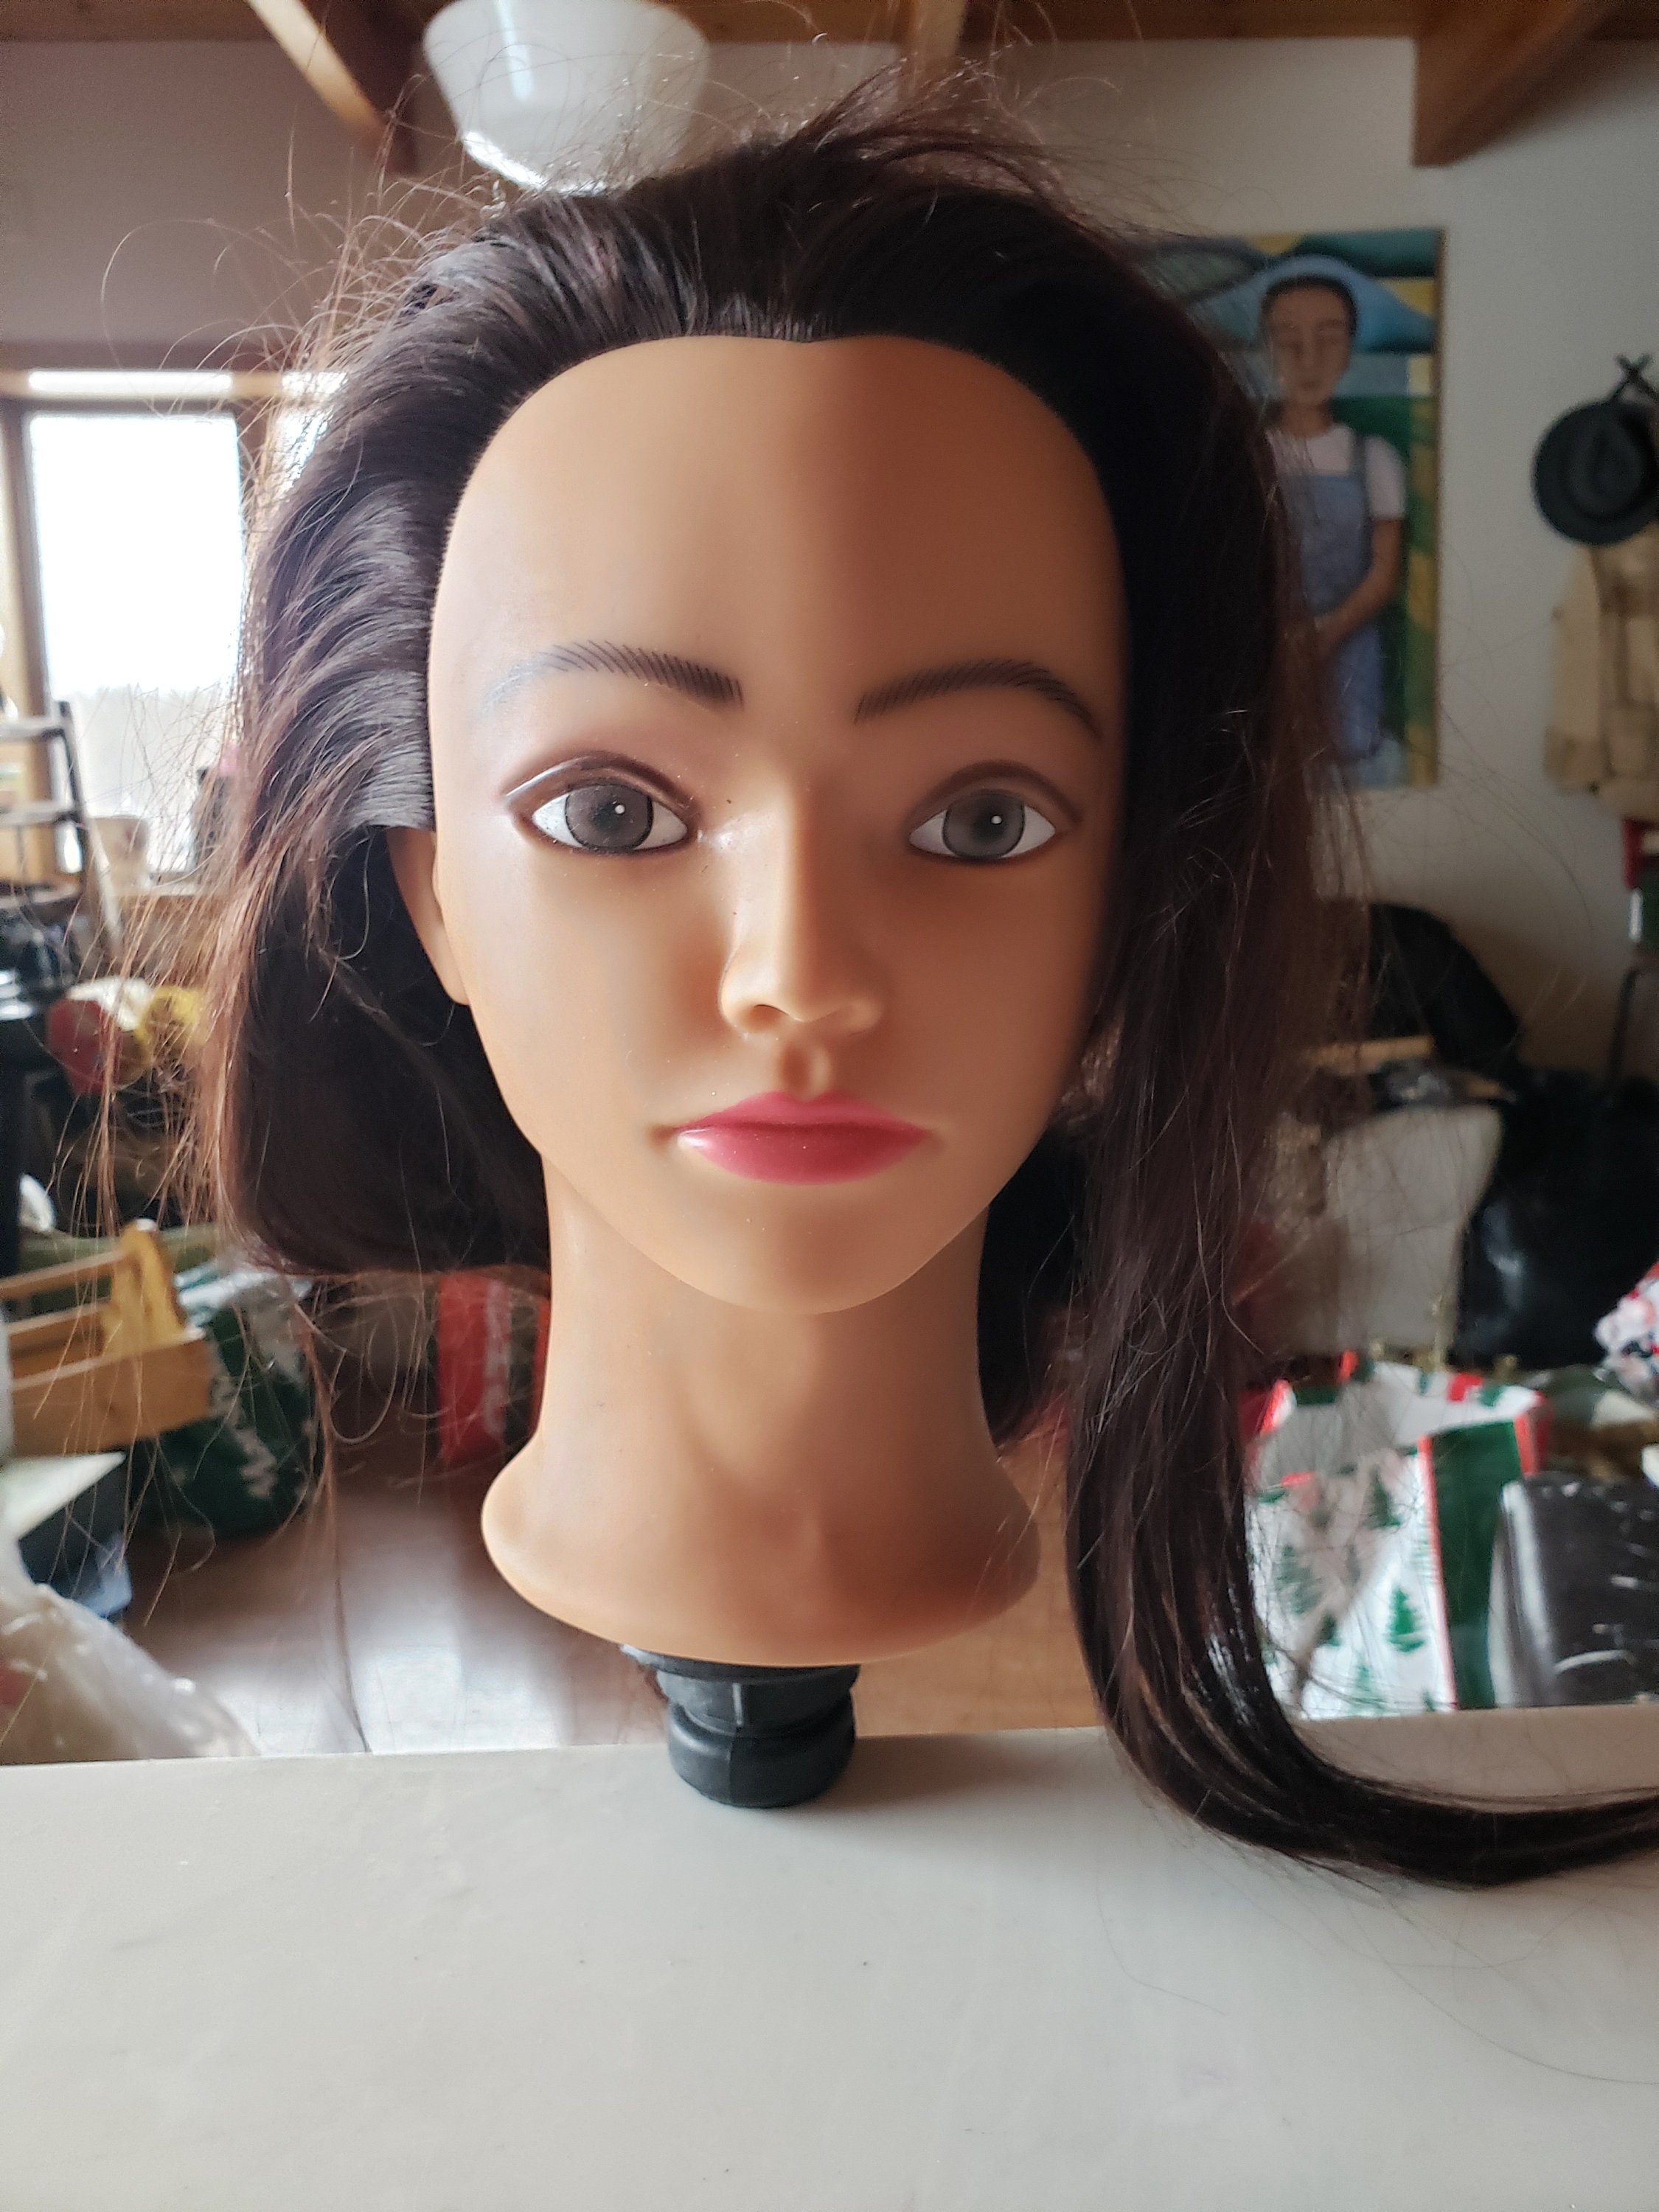 Bellrino 24  Cosmetology Mannequin Manikin Training Head with Human Hair -  Lindsey (CLAMP HOLDER INCLUDED) 